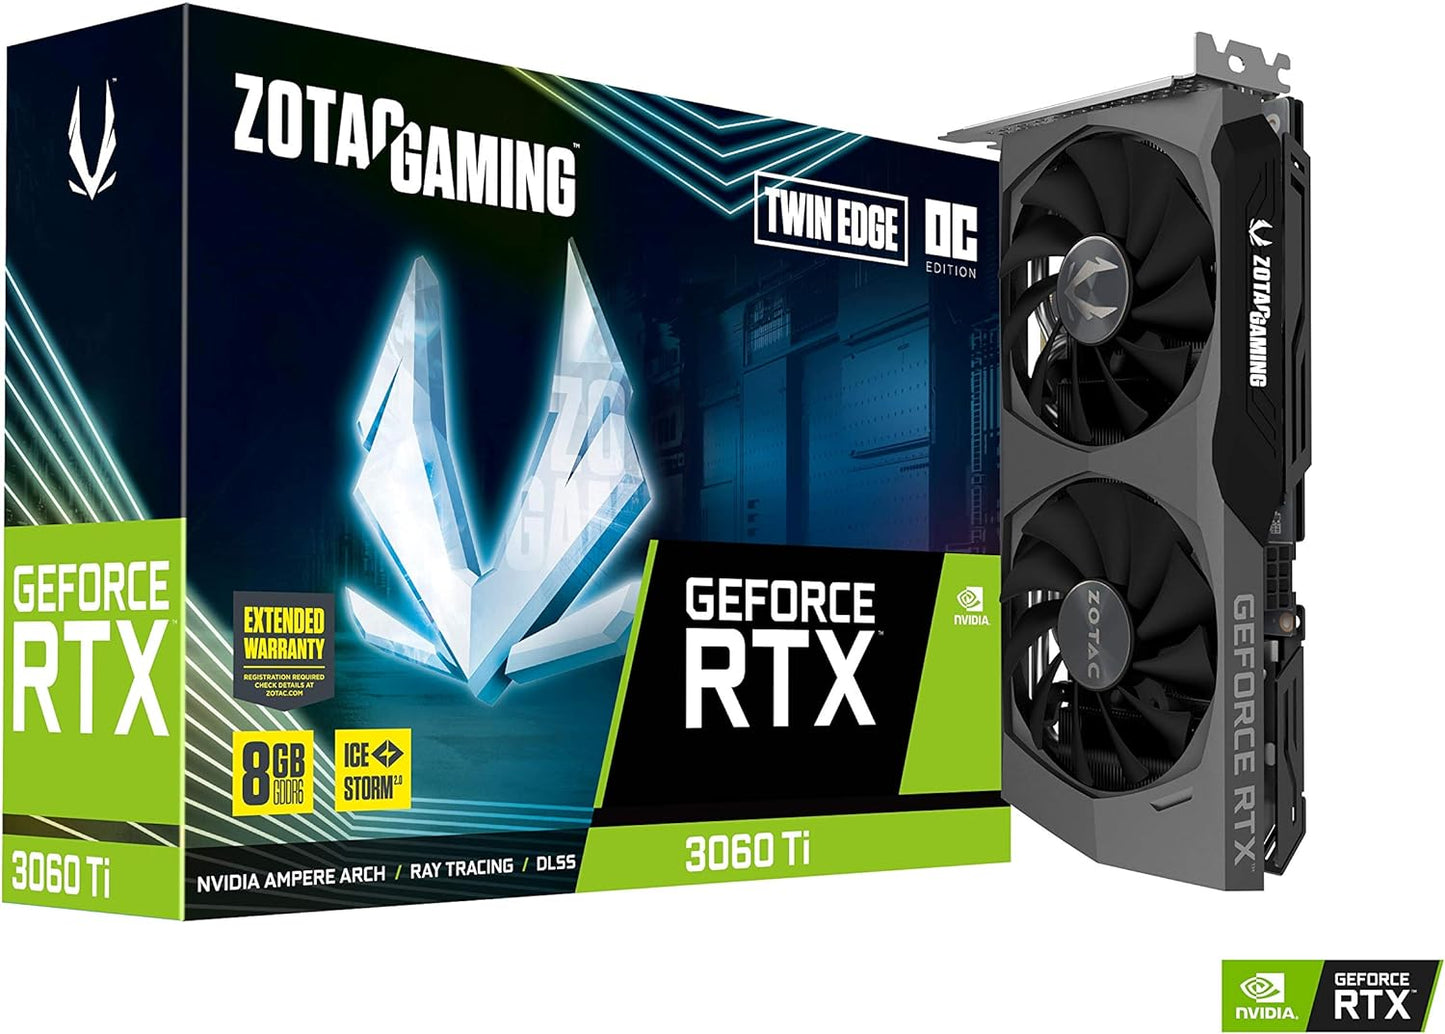 ZOTAC Gaming GeForce RTX™ 3060 Ti Twin Edge OC LHR 8GB GDDR6 256-bit 14 Gbps PCIE 4.0 Graphics Card, IceStorm 2.0 Advanced Cooling, Active Fan Control, Freeze Fan Stop ZT-A30610H-10MLHR